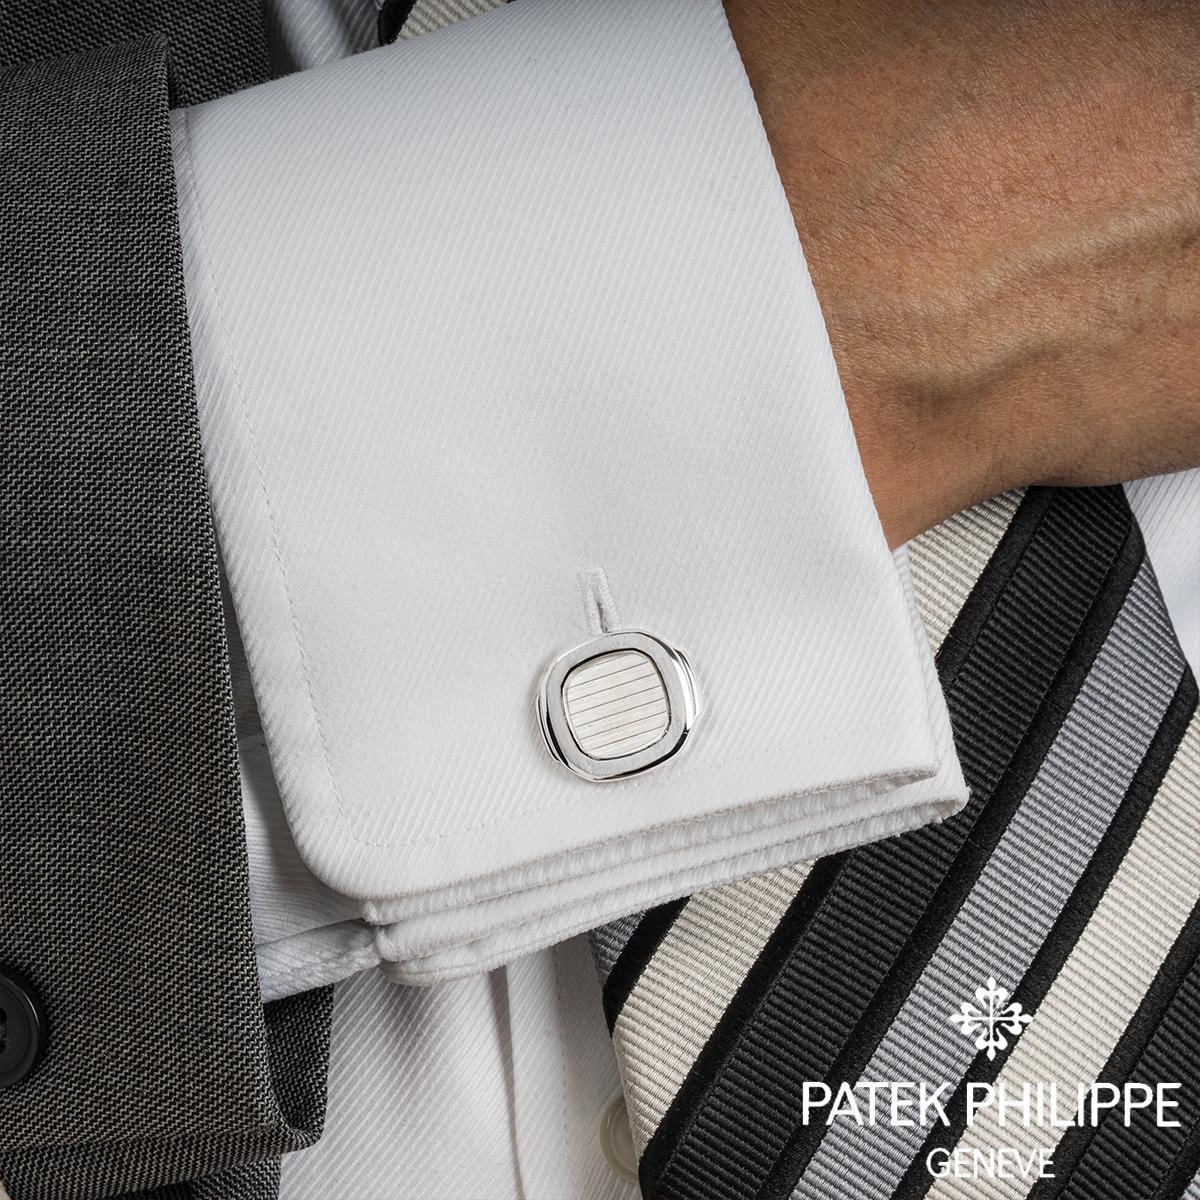 Patek Philippe White Gold Nautilus Cufflinks In Excellent Condition For Sale In London, GB